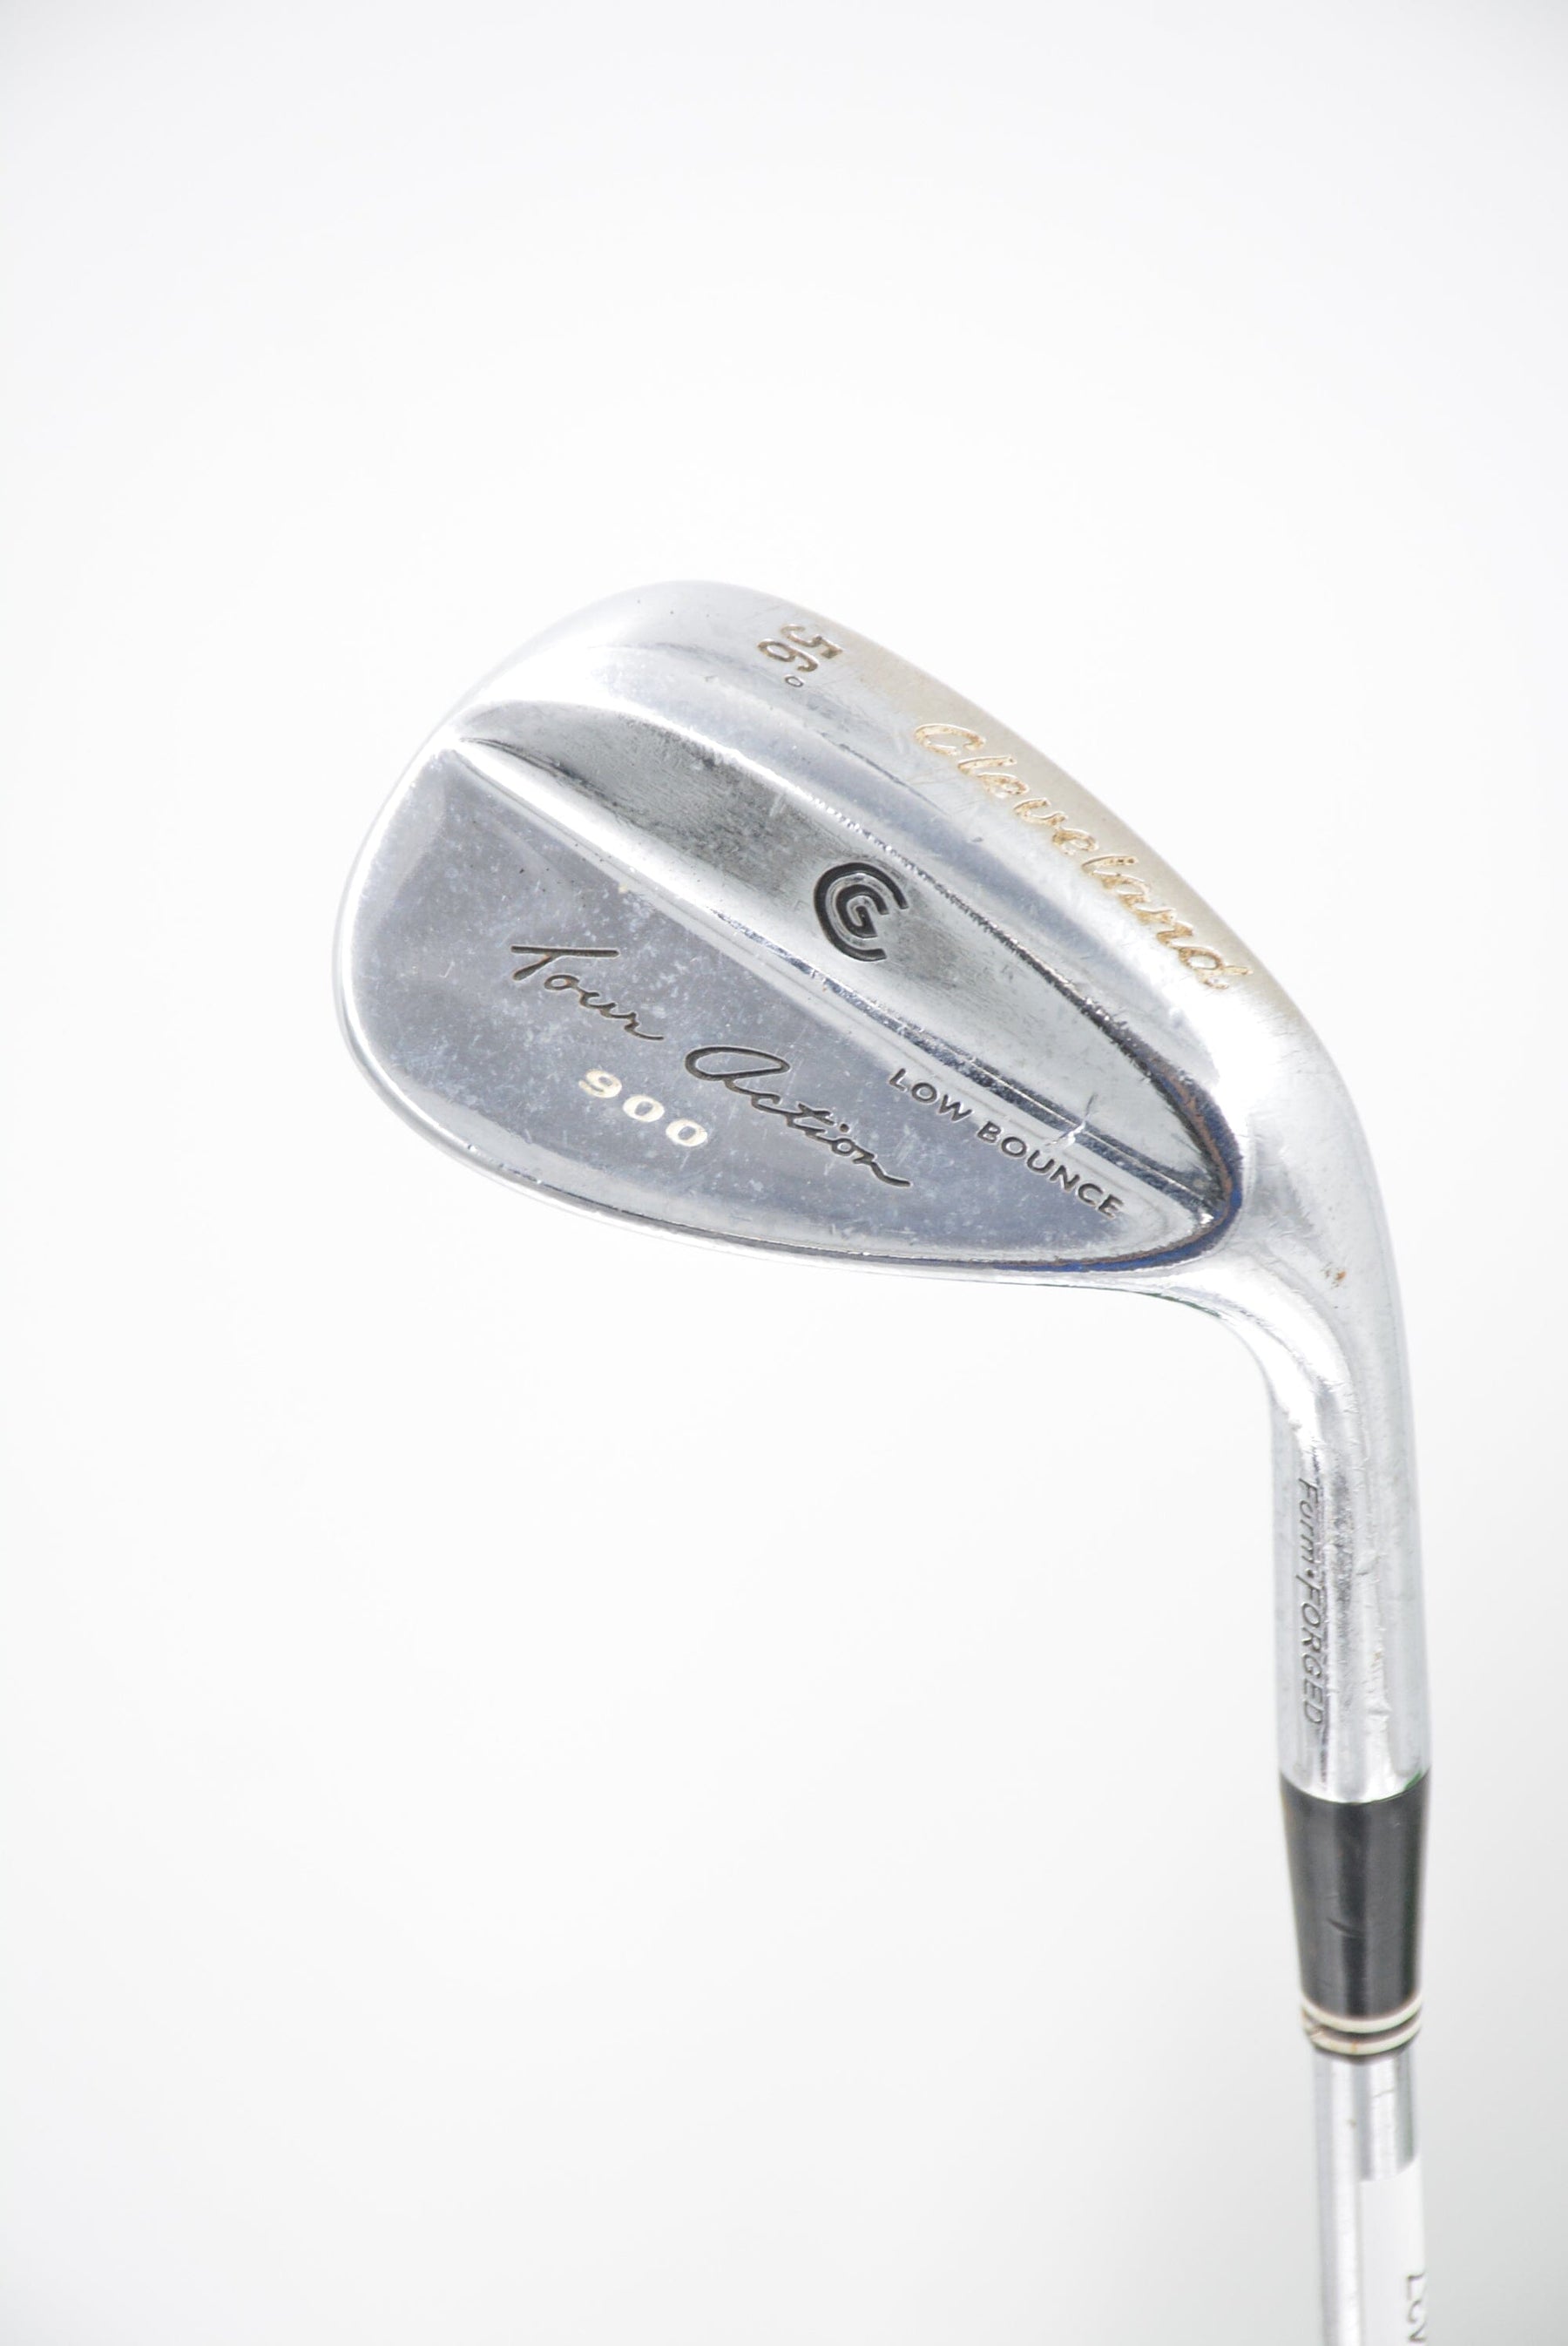 Cleveland 900 Formforged Chrome Low Bounce 56 Degree Wedge Wedge Flex Golf Clubs GolfRoots 